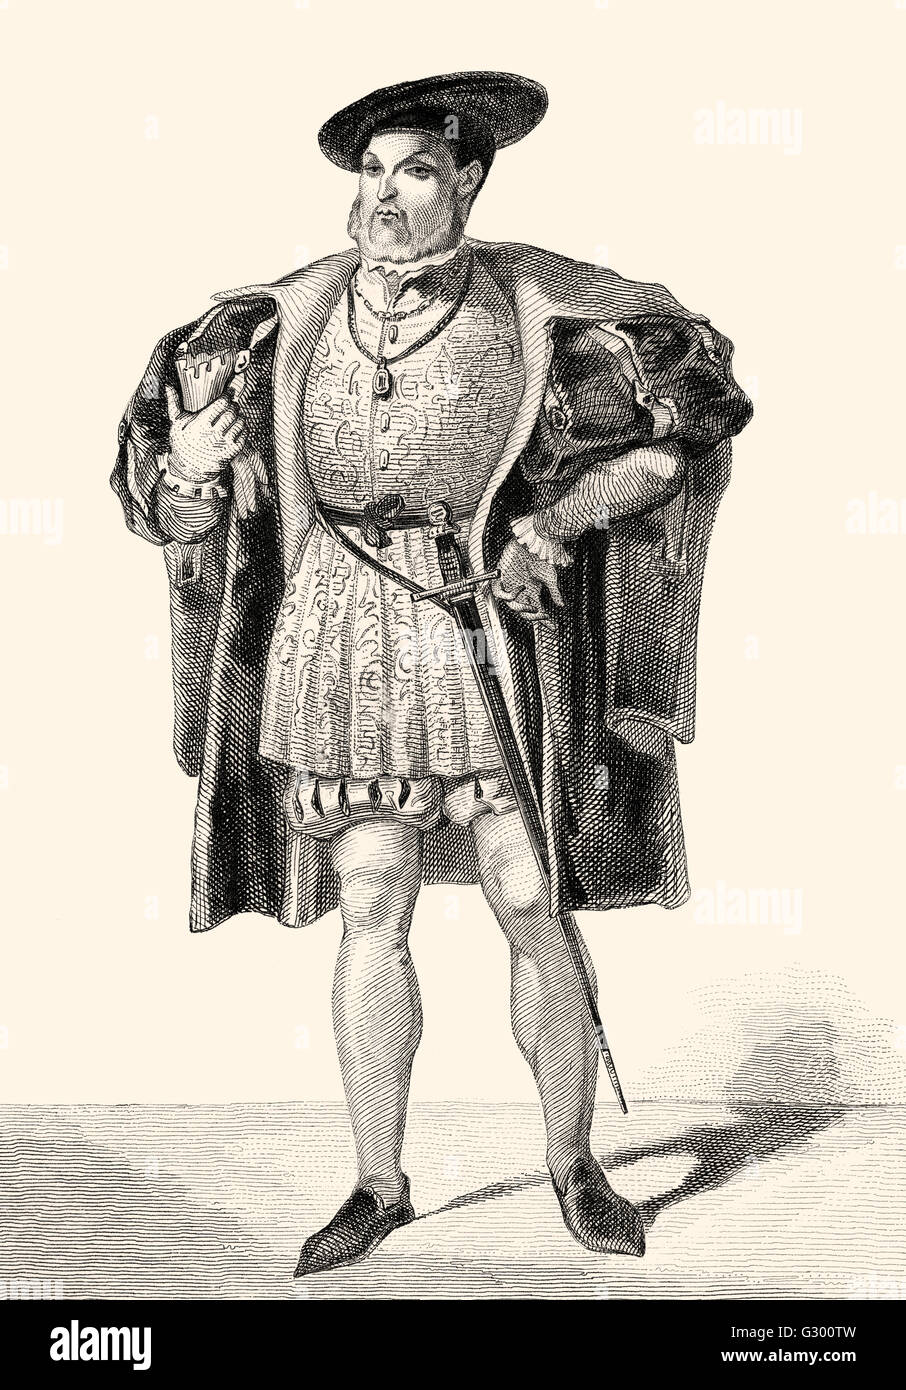 Henry VIII, roi d'Angleterre, 1491-1547 Banque D'Images